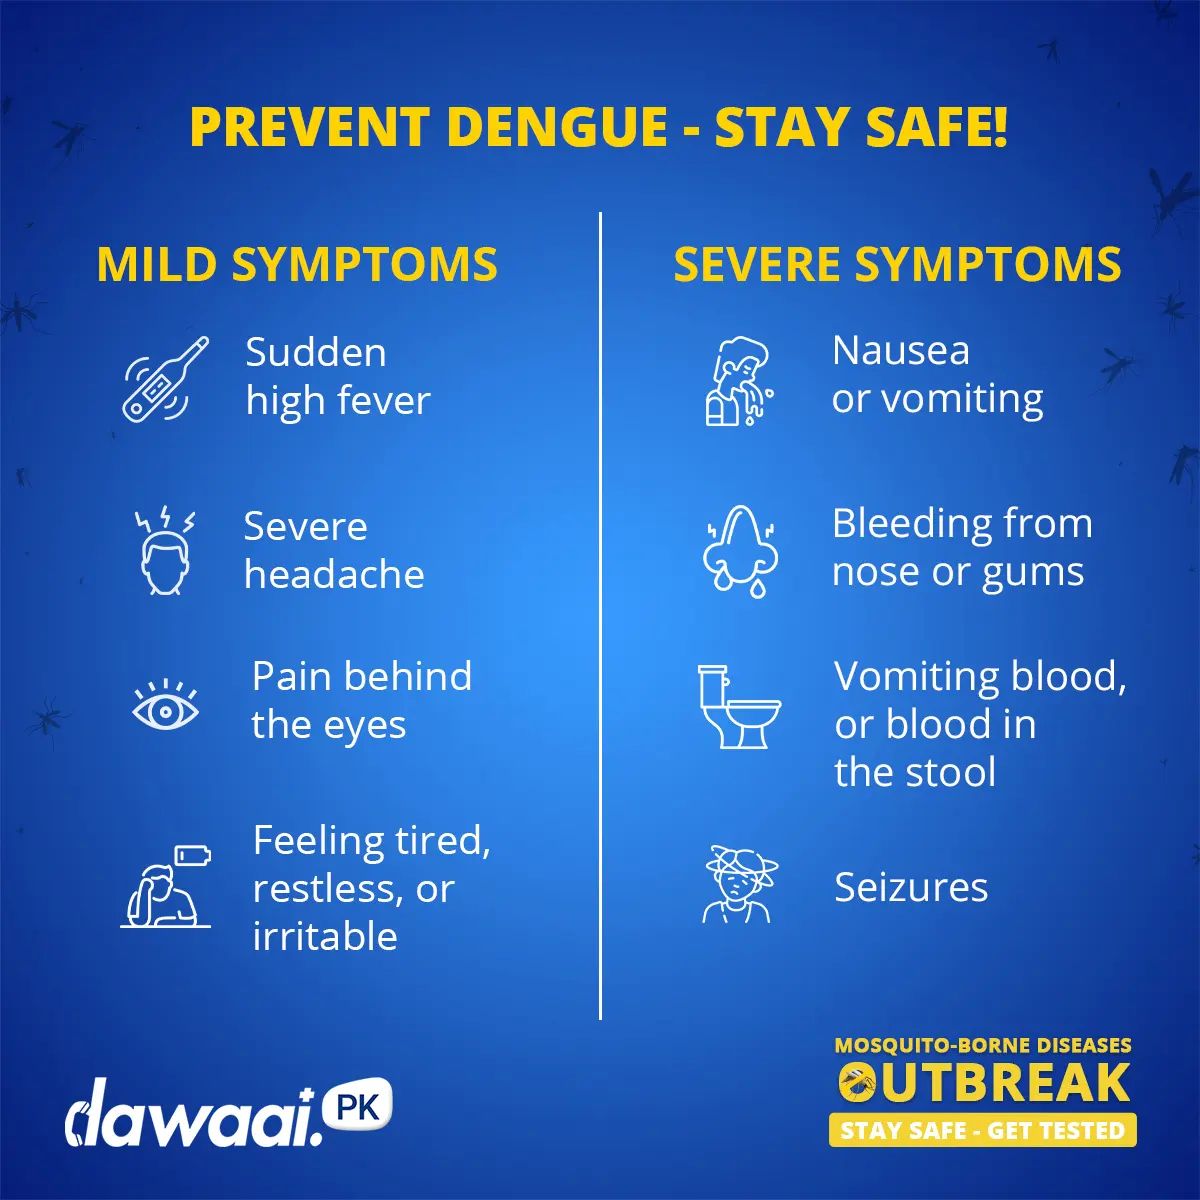 Dengue Virus typically starts off with a fever but it's much more than that! 
Distinguish between mild to severe symptoms of #Dengue and stay safe! 
Sort through various Dengue tests on #Dawaai and get yourself tested at home. 
Click the link👇
https://bit.ly/3KQu7Gi
#Denguefever #DenguePrevention #Denguesymptoms #StayInformed